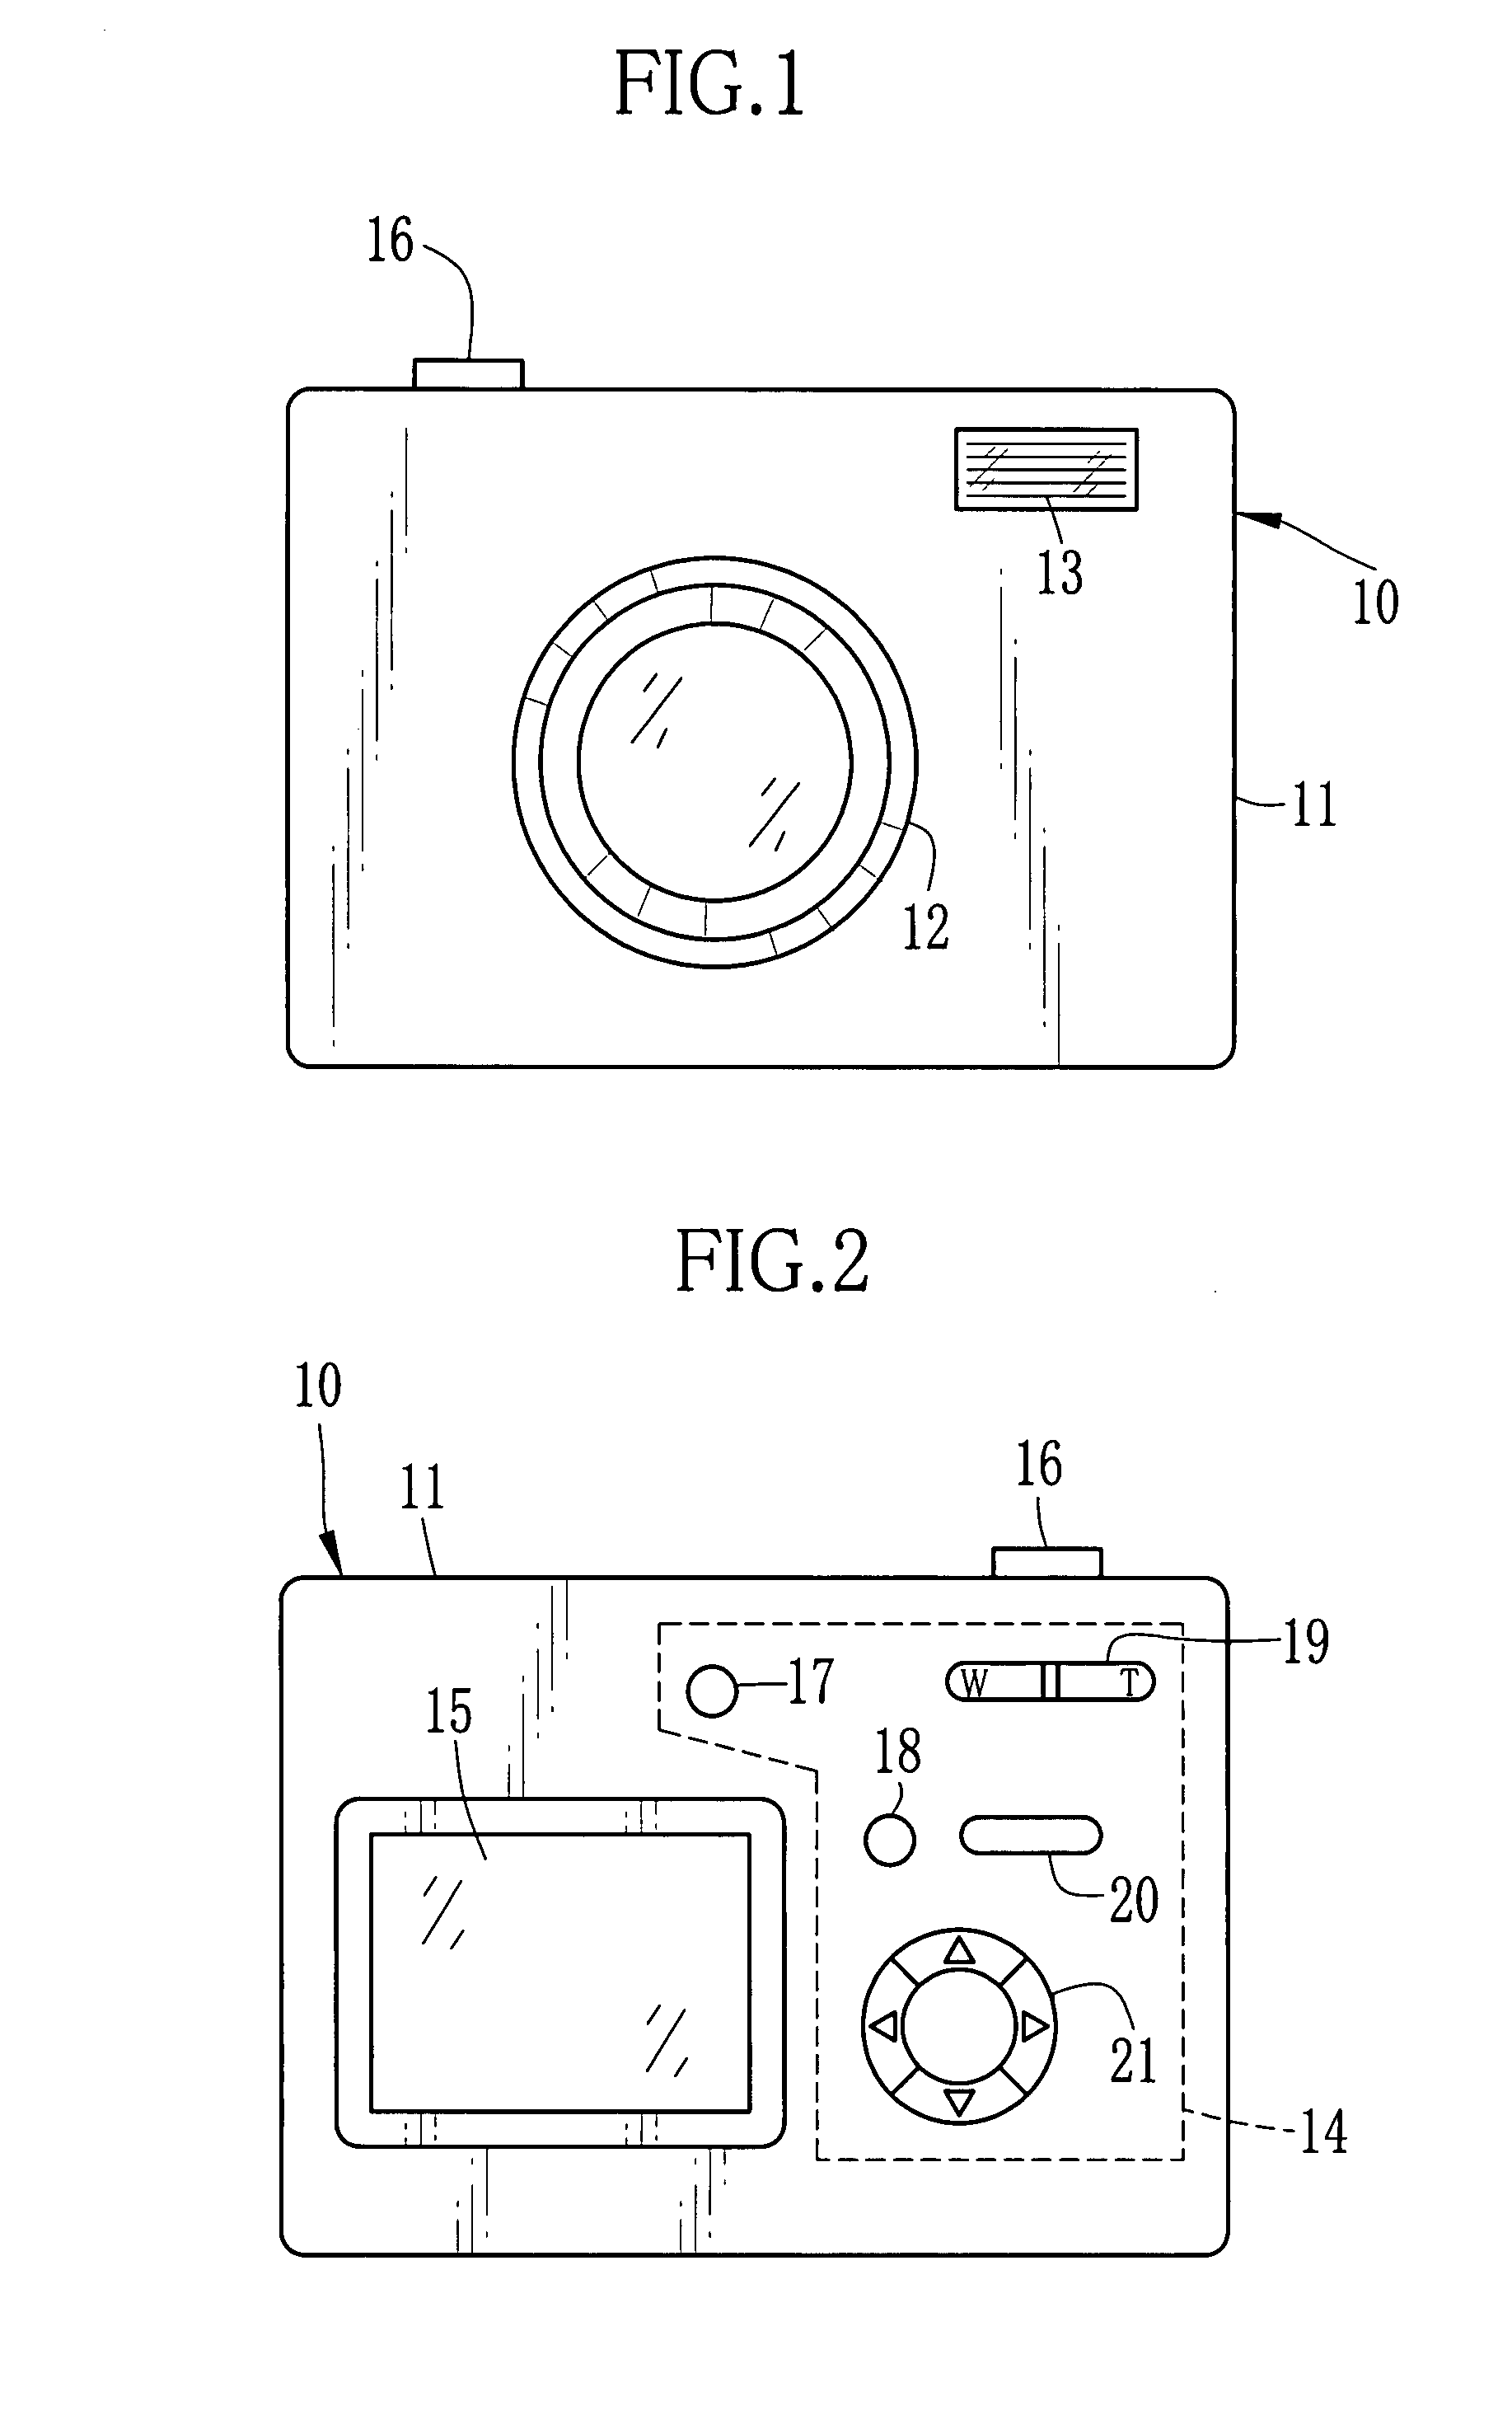 Imaging apparatus with memory for storing camera through image data